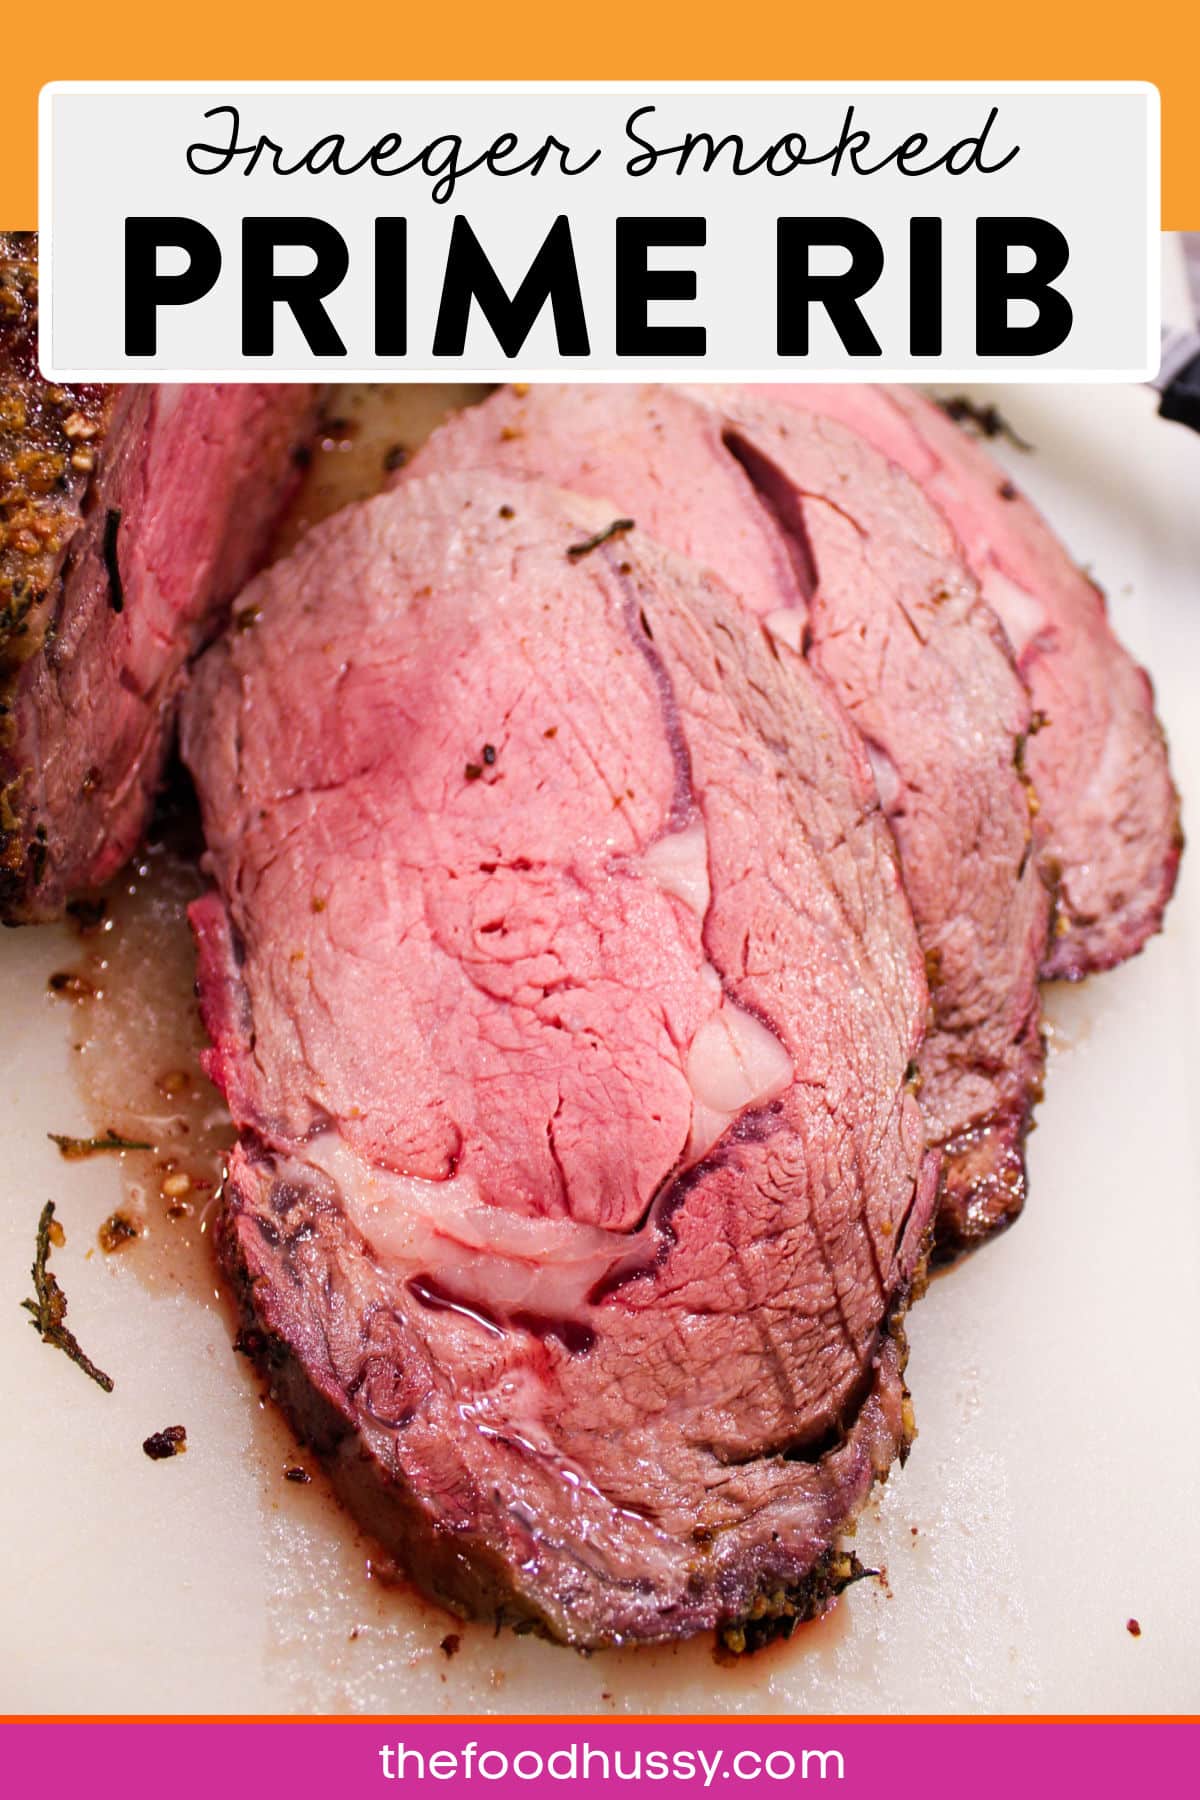 This Traeger Prime Rib will serve up the perfect flavor for your holiday meal! Simple seasonings and a few hours will make the most melt-in-your-mouth Prime Rib!  via @foodhussy